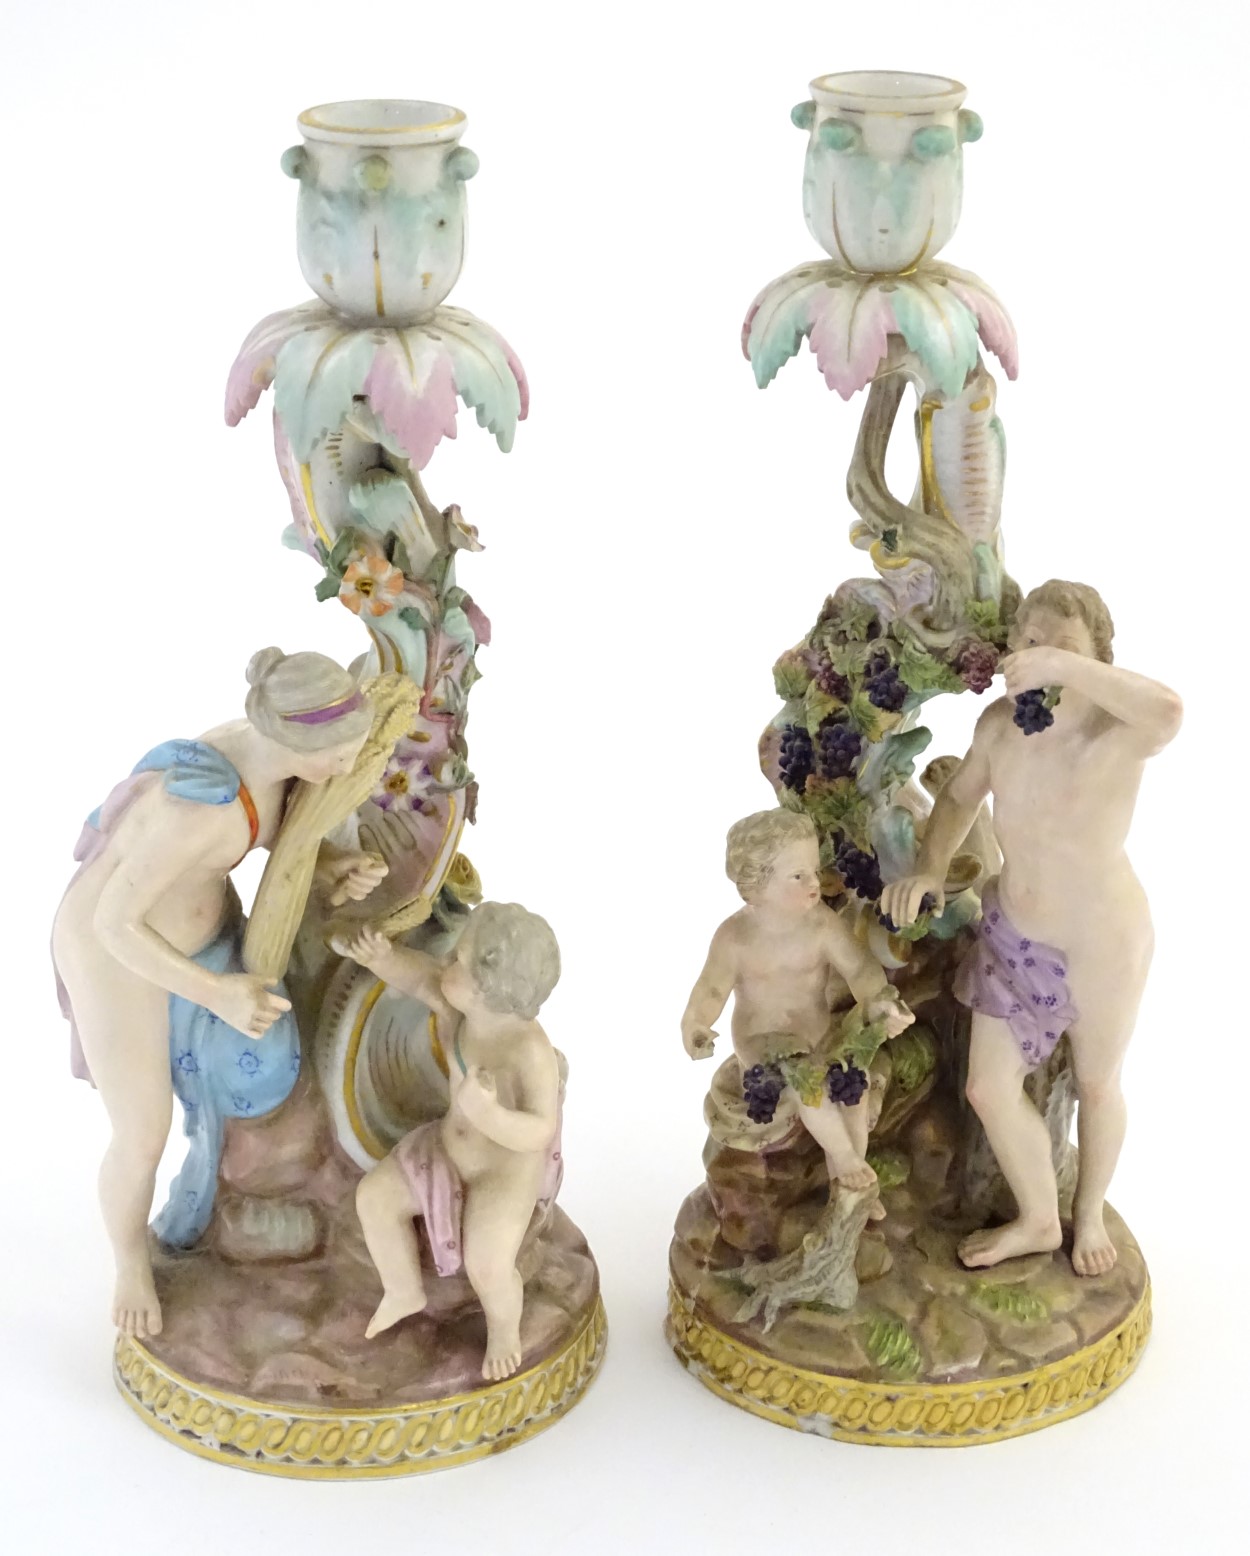 Two Meissen porcelain candlesticks, one depicting Bacchus and a child with vines and grapes,